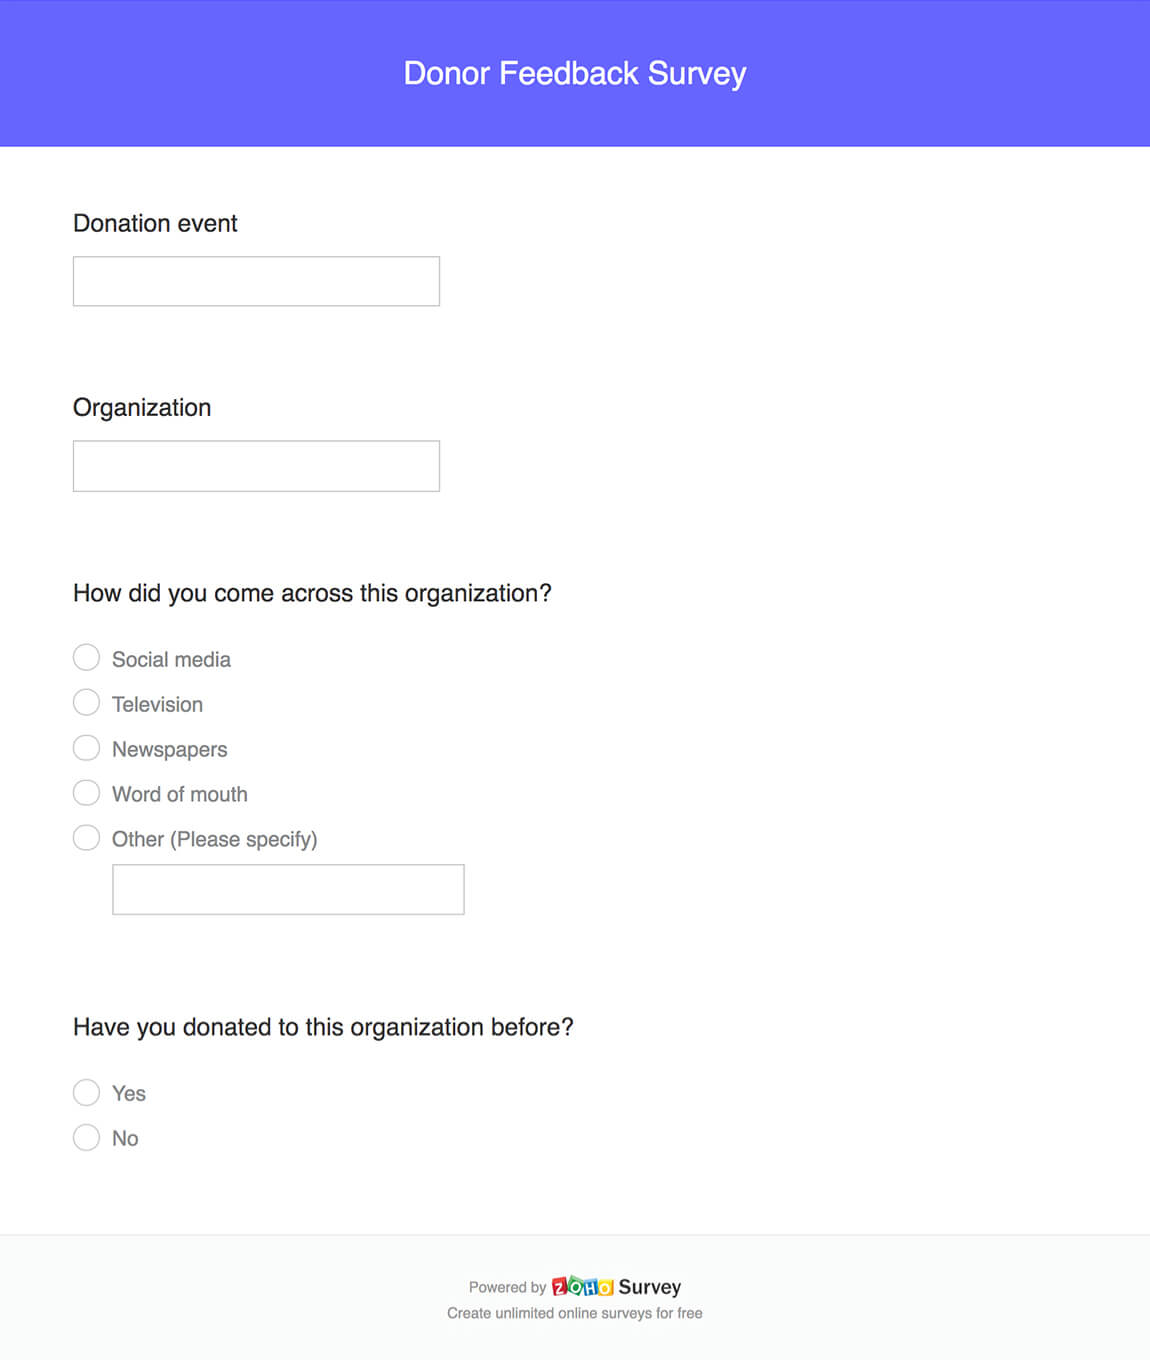 Donor feedback survey questionnaire template